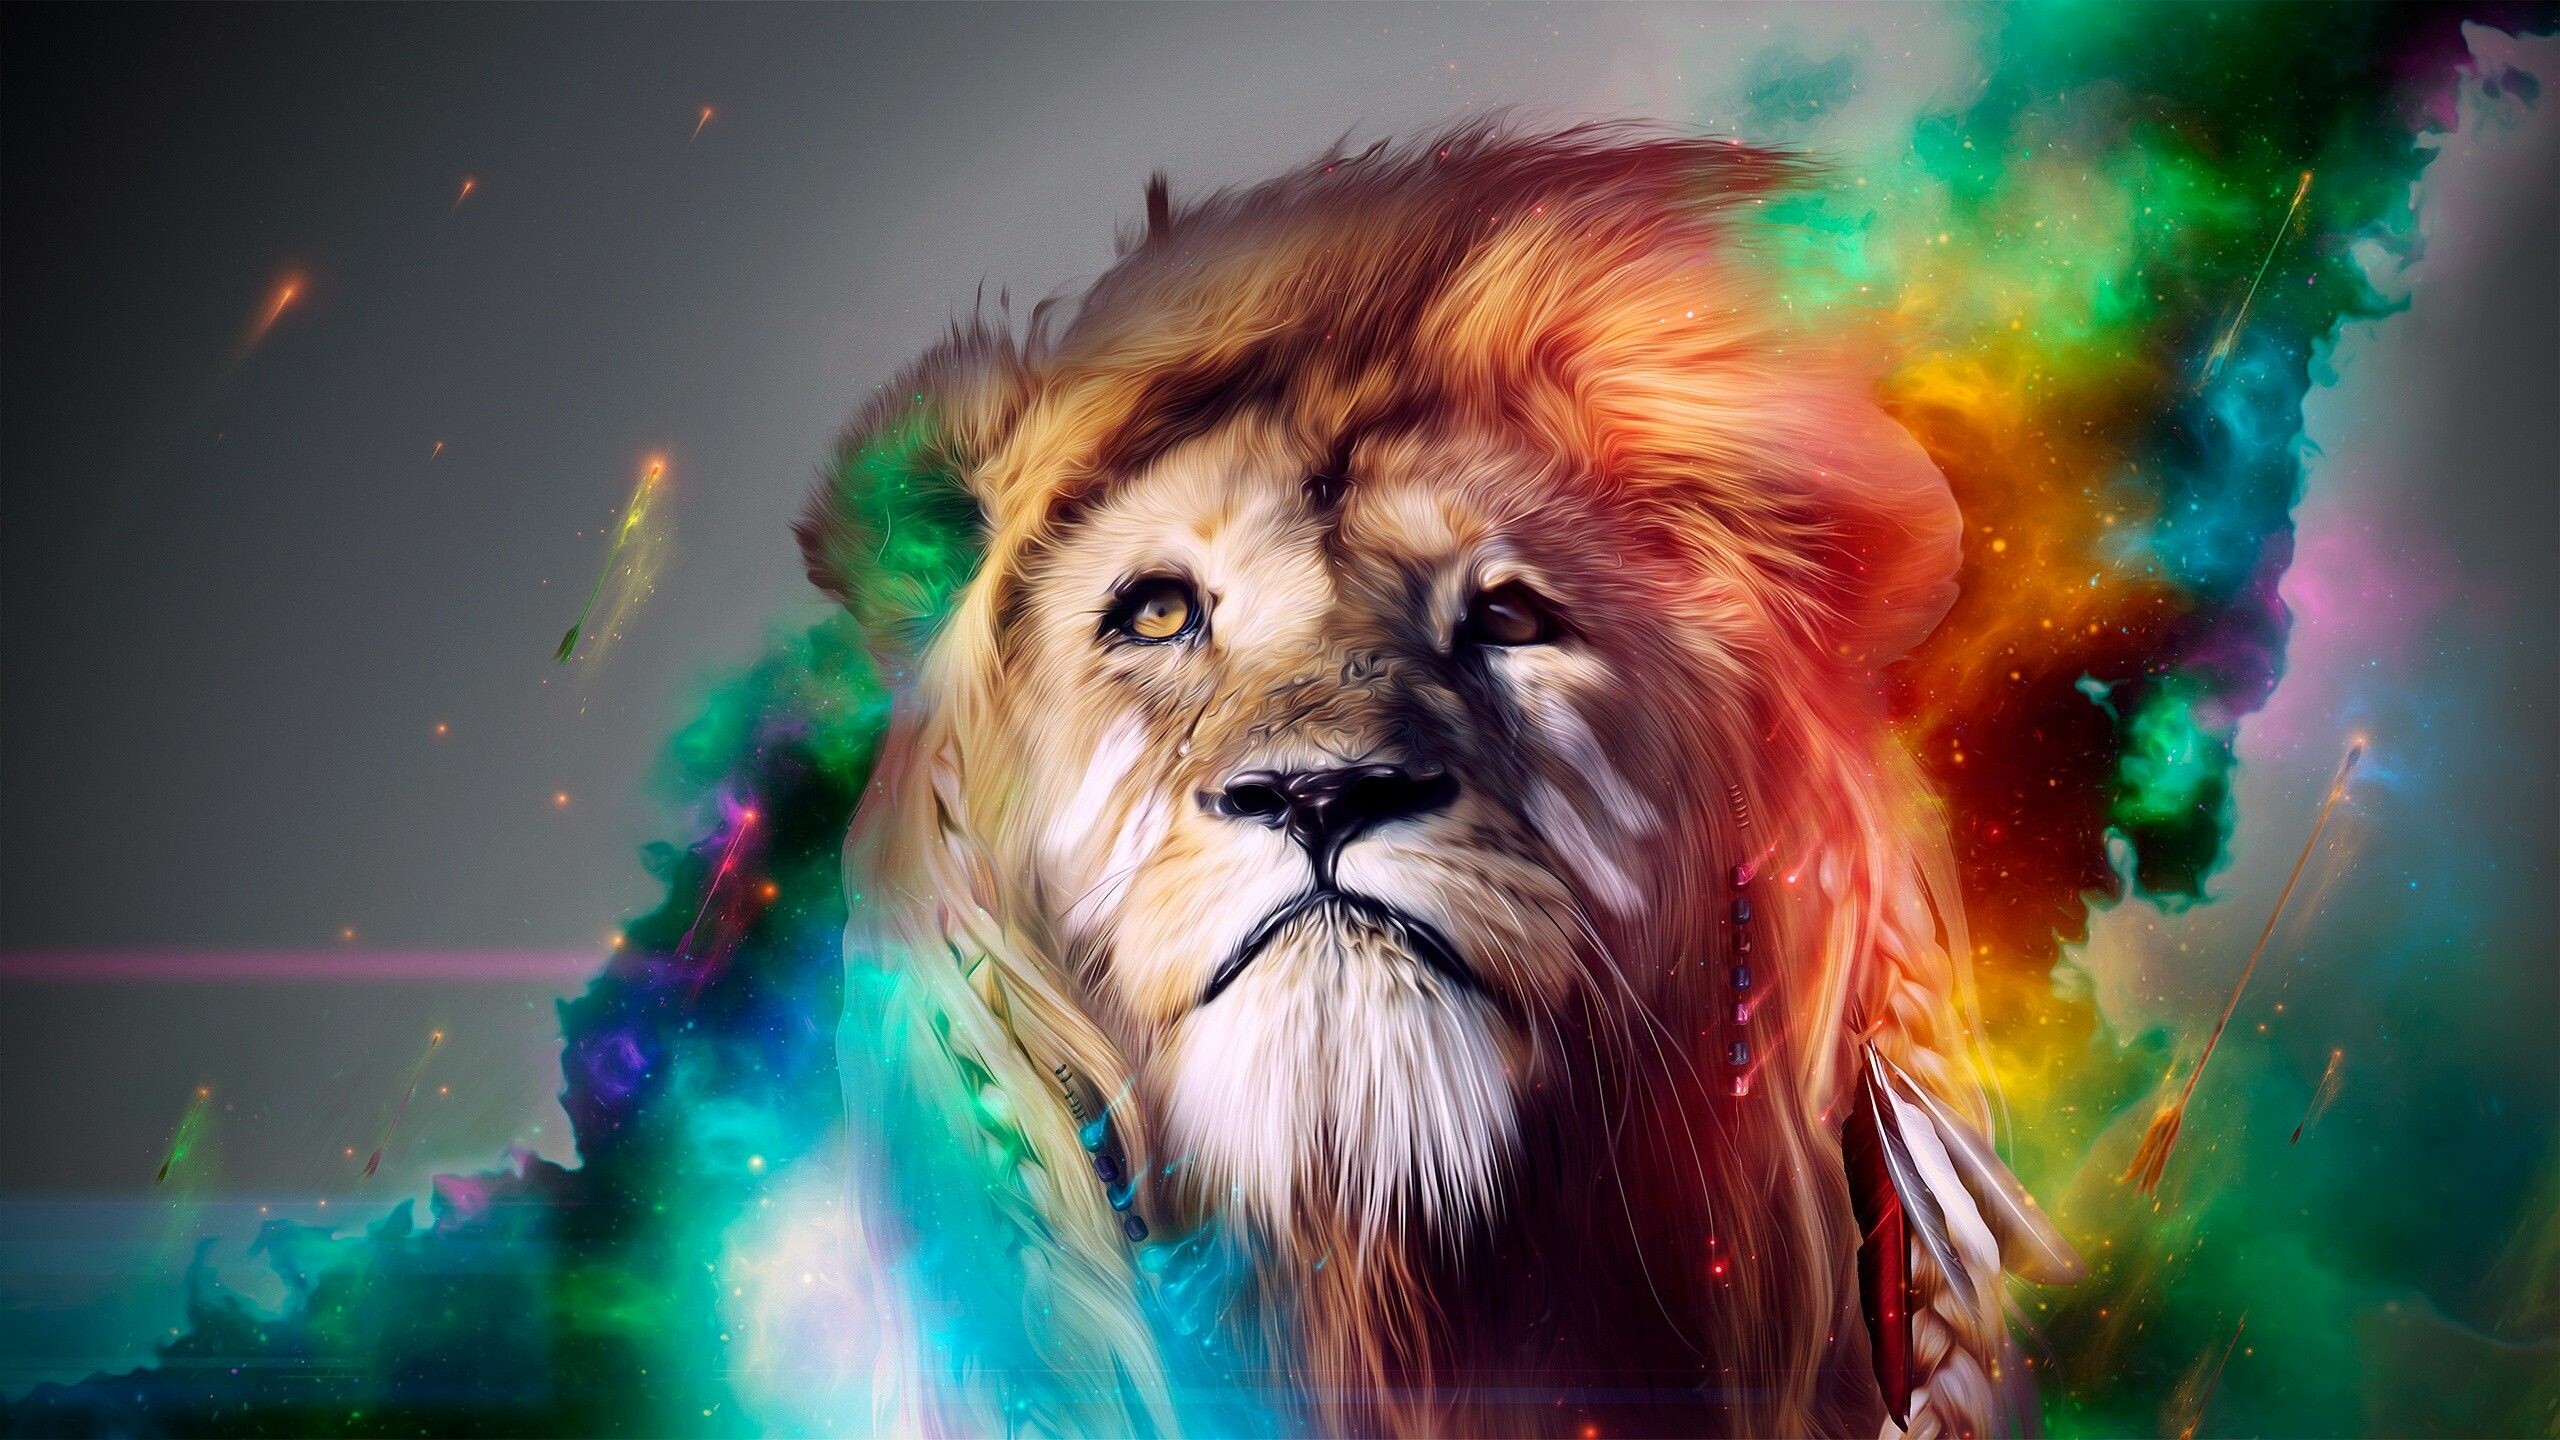 58+ Cool Lion Wallpapers: HD, 4K, 5K for PC and Mobile | Download free  images for iPhone, Android